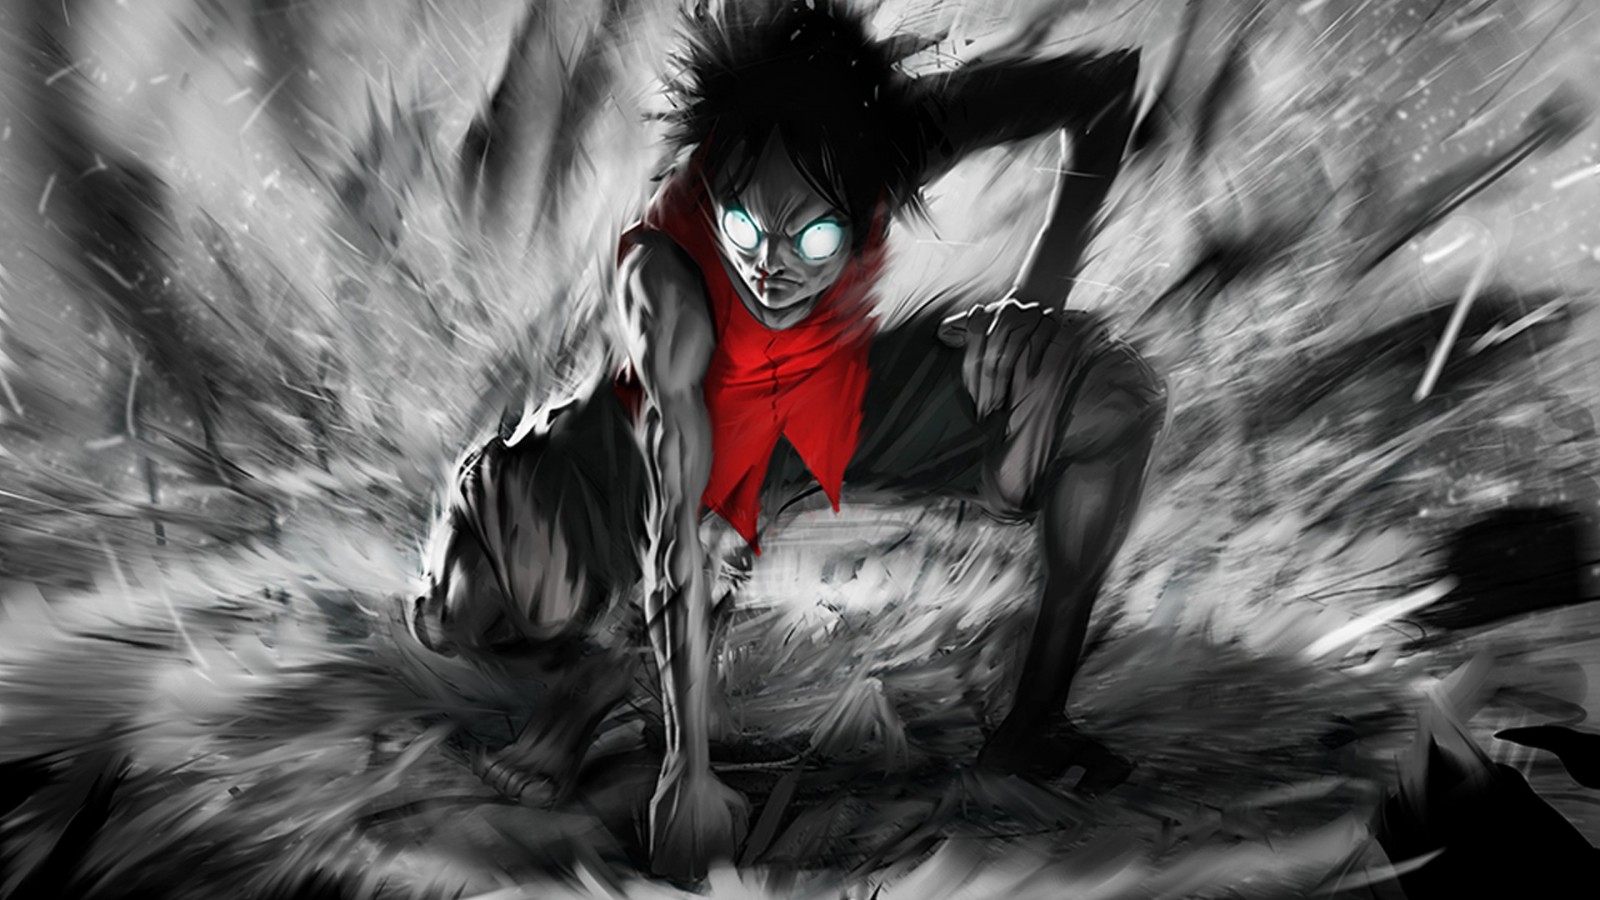 drawing, monochrome, anime, One Piece, Monkey D Luffy, darkness, wing, sketch, screenshot, computer wallpaper, black and white, monochrome photography, fictional character. Mocah HD Wallpaper